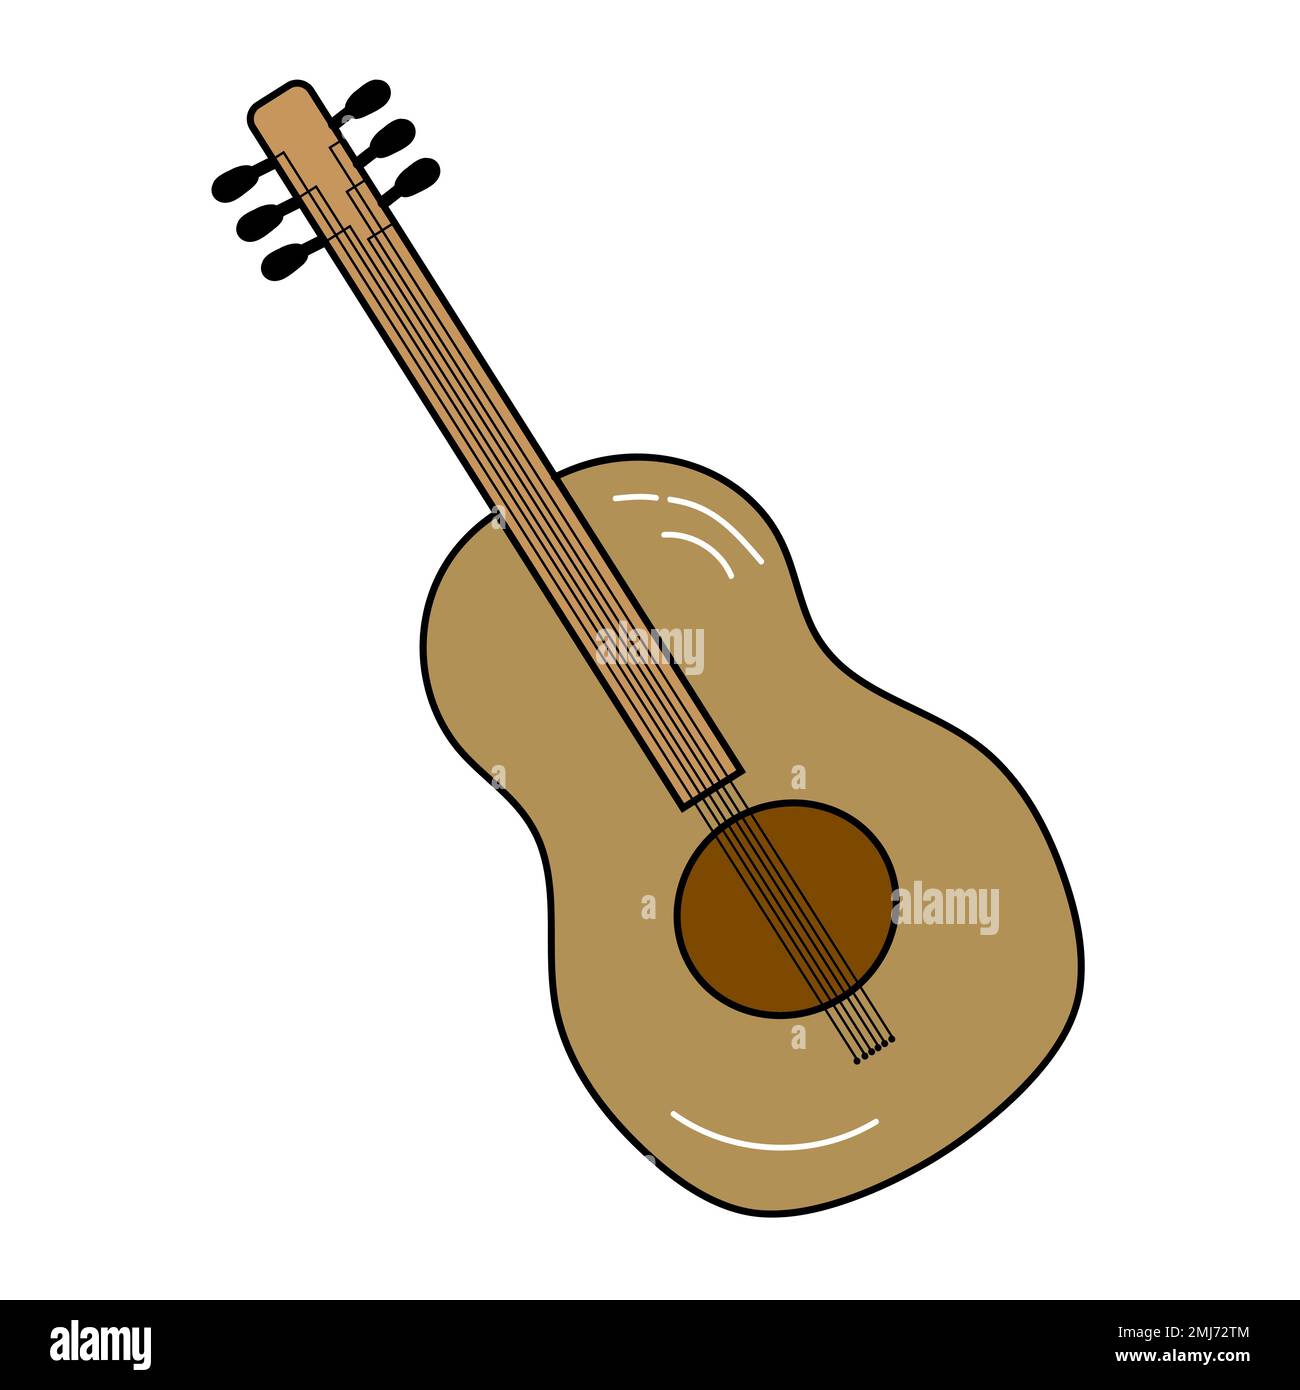 Musical instrument - Front view classic vintage acoustic guitar folk country  flower bird pickguard isolated on a black background Stock Photo - Alamy